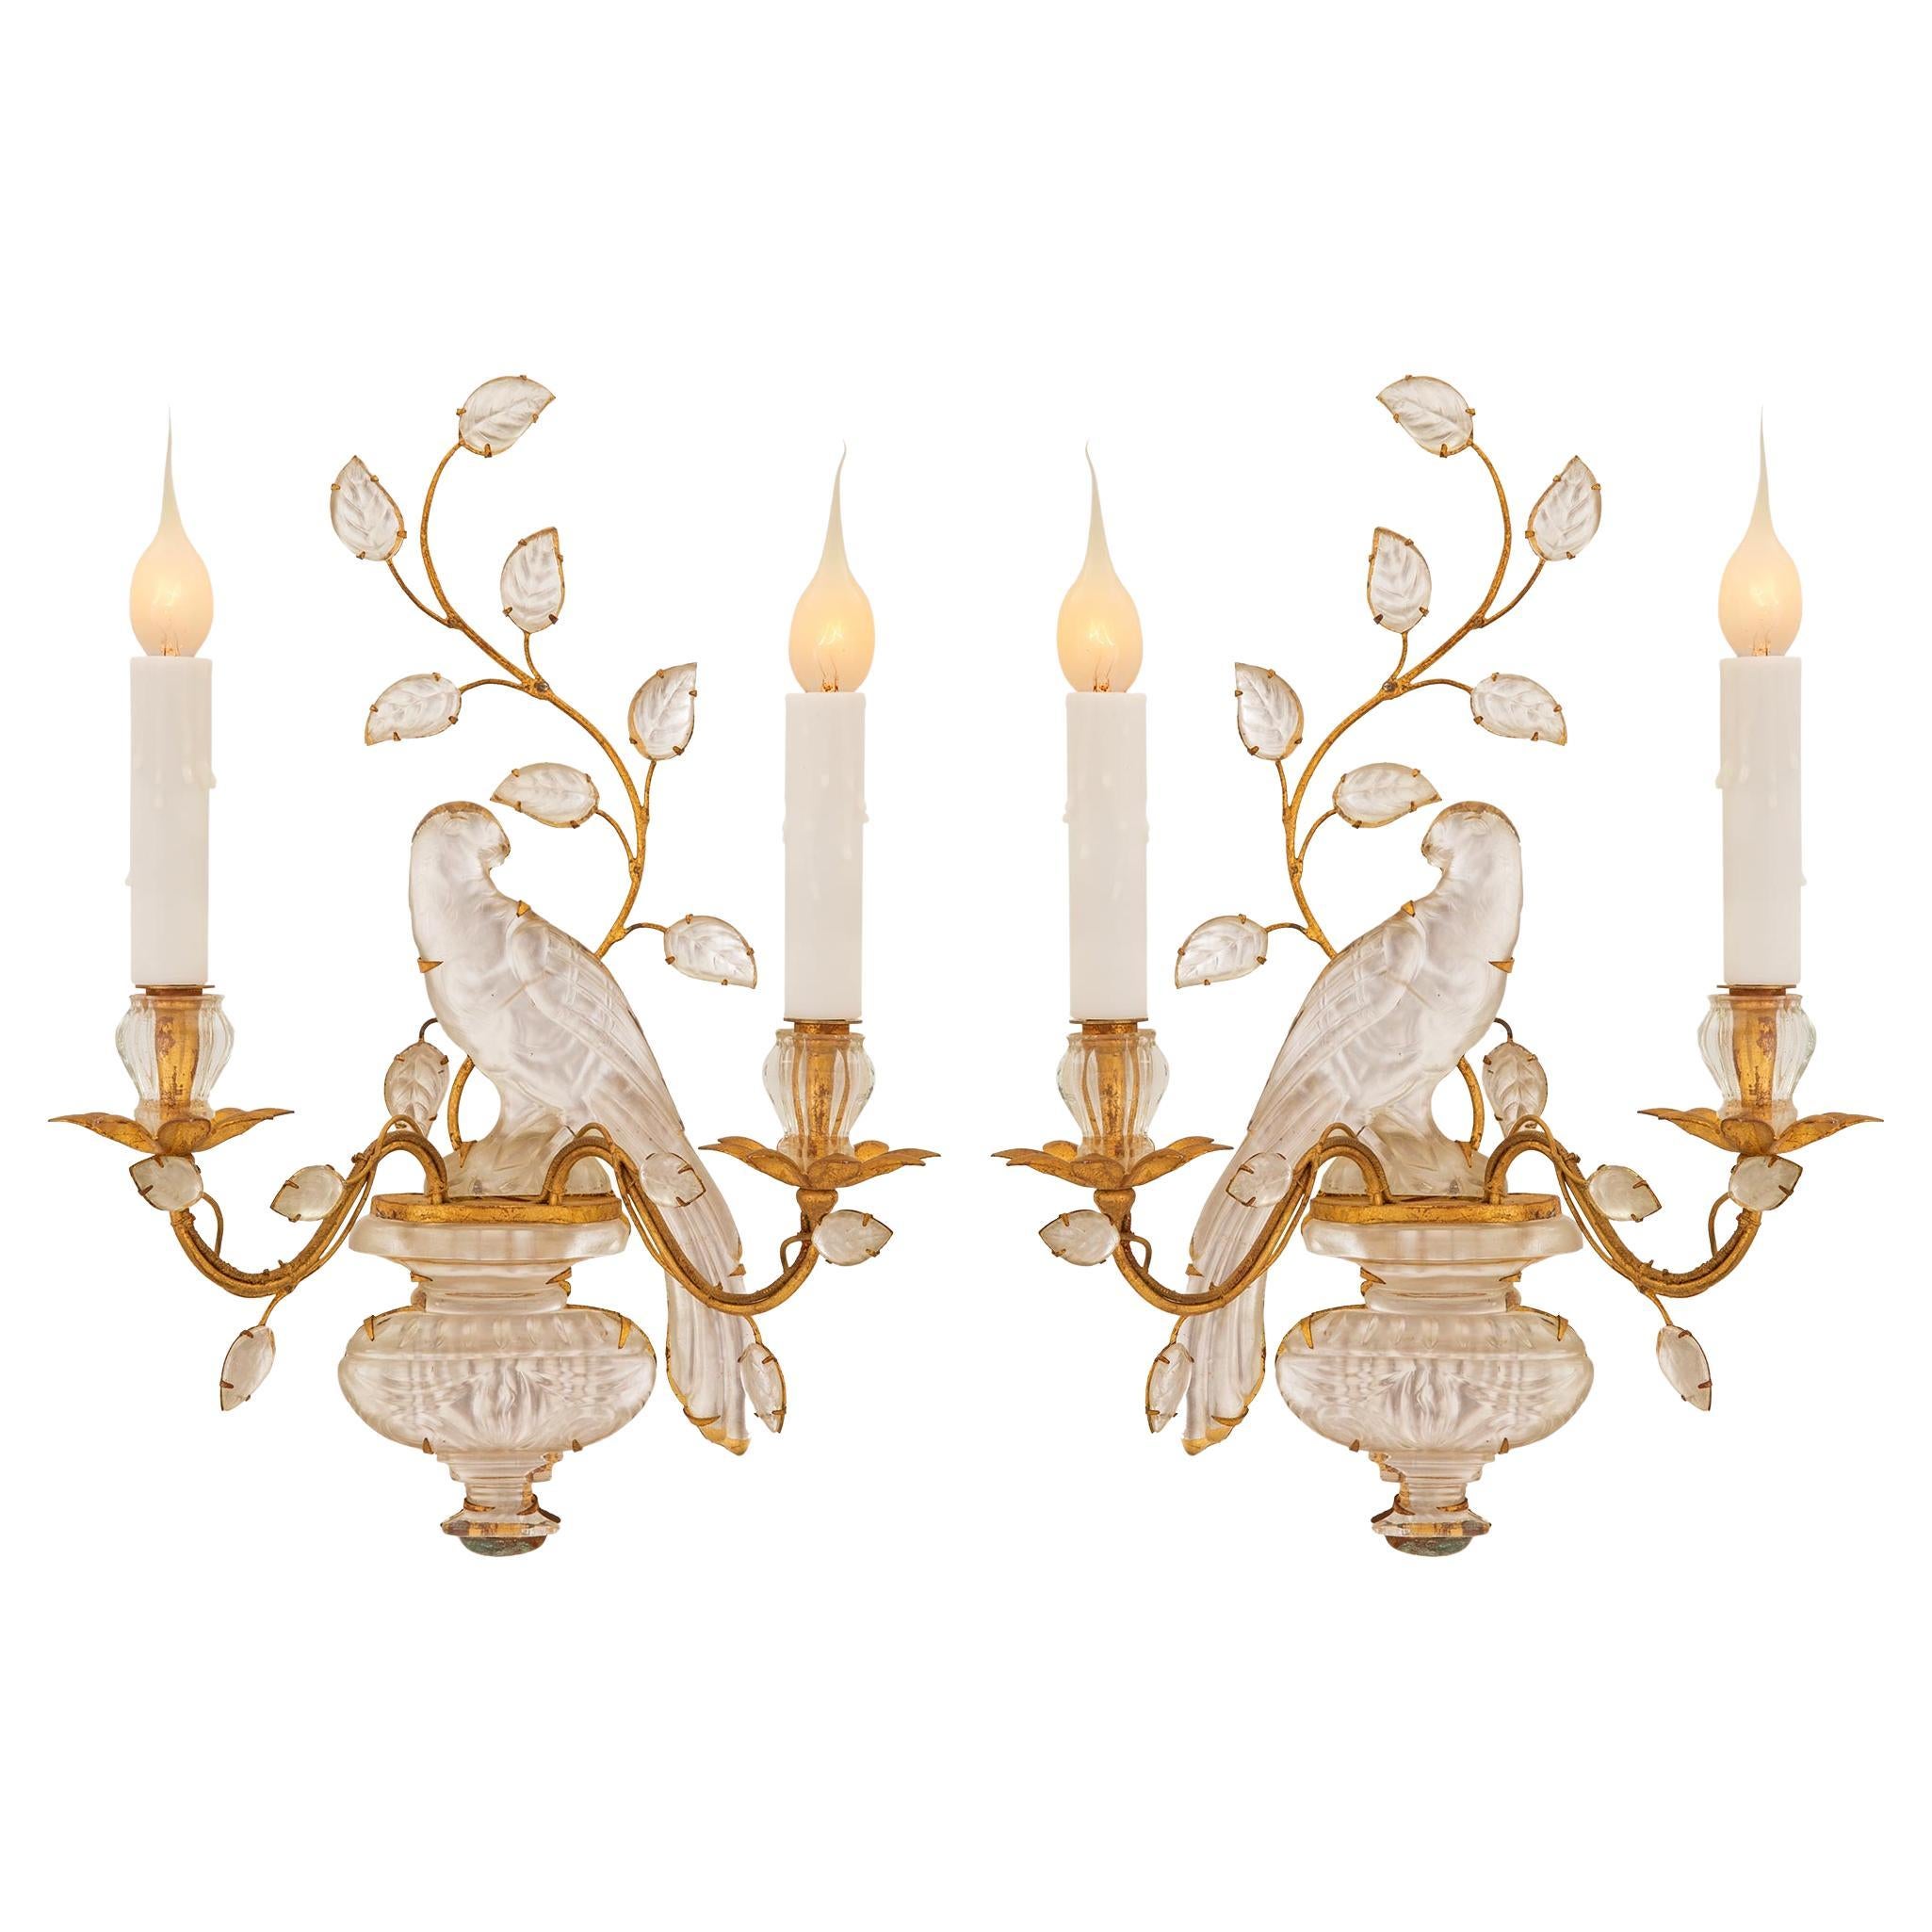 Pair Of French Turn Of The Century Louis XVI St. Sconces Attrib.To Maison Bagues For Sale